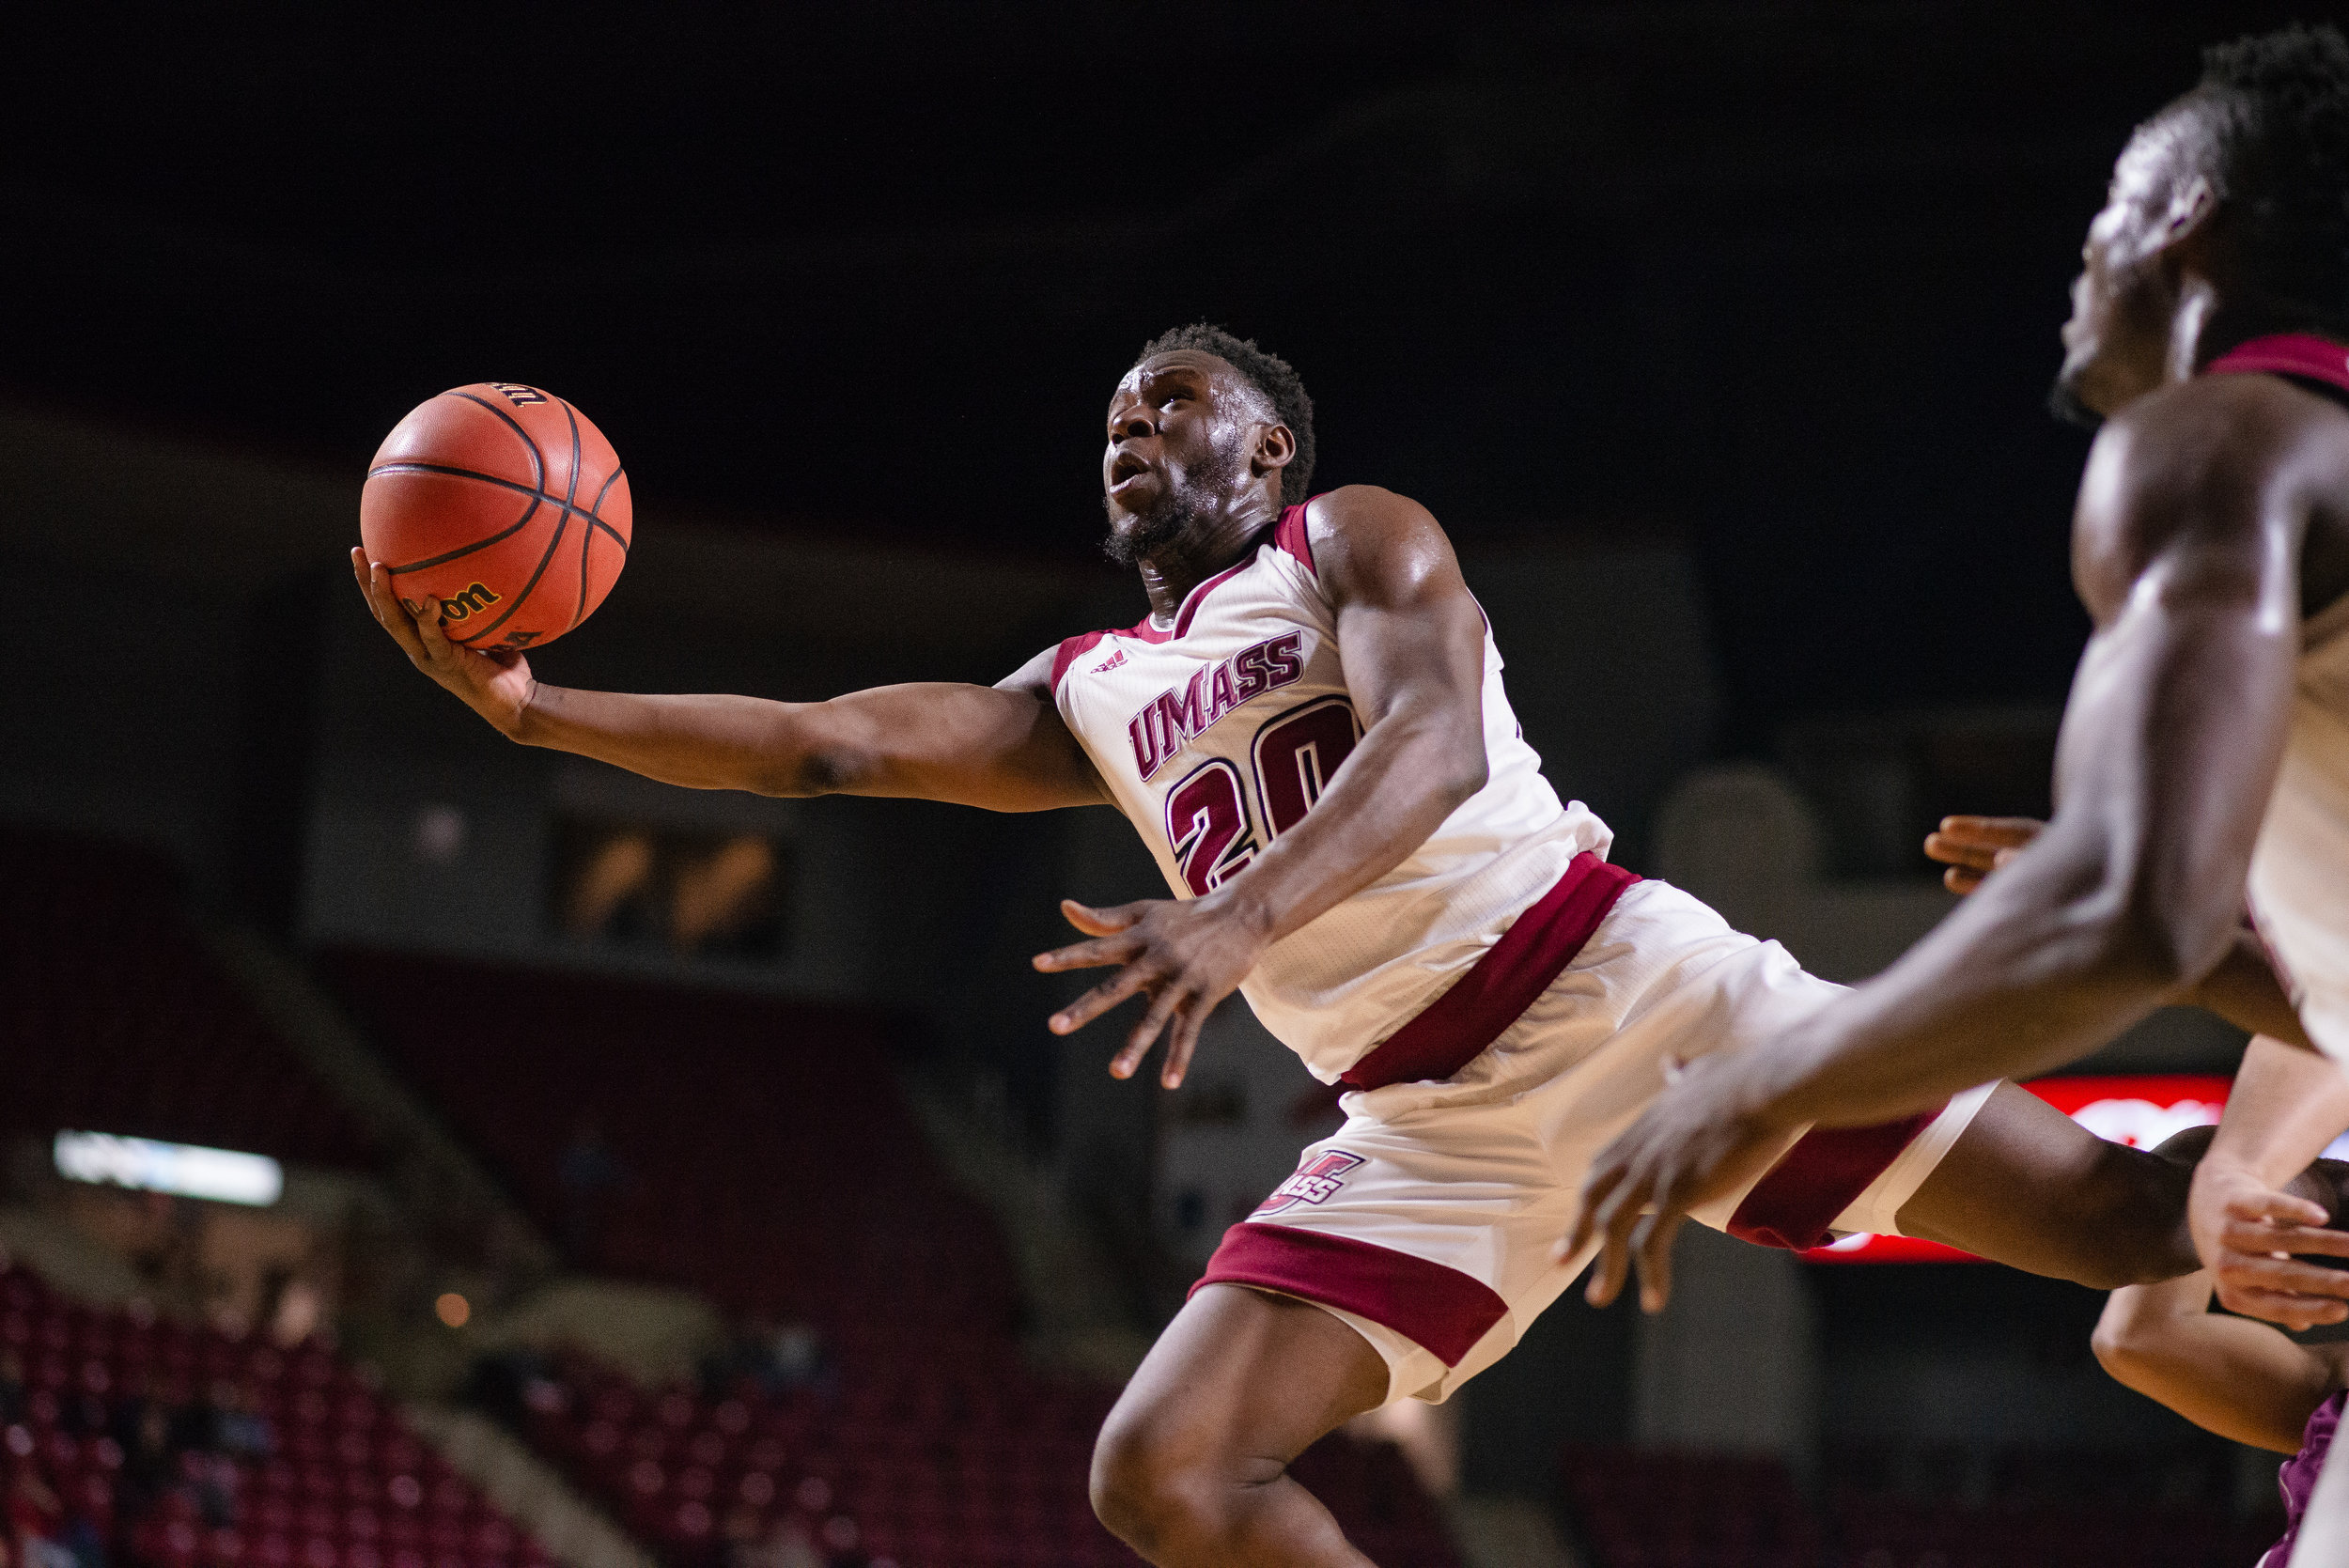  UMass Men's Basketball vs Fordham on Feb. 6, 2019 at the Mullins Center in Amherst.  (Photo by Judith Gibson-Okunieff) 